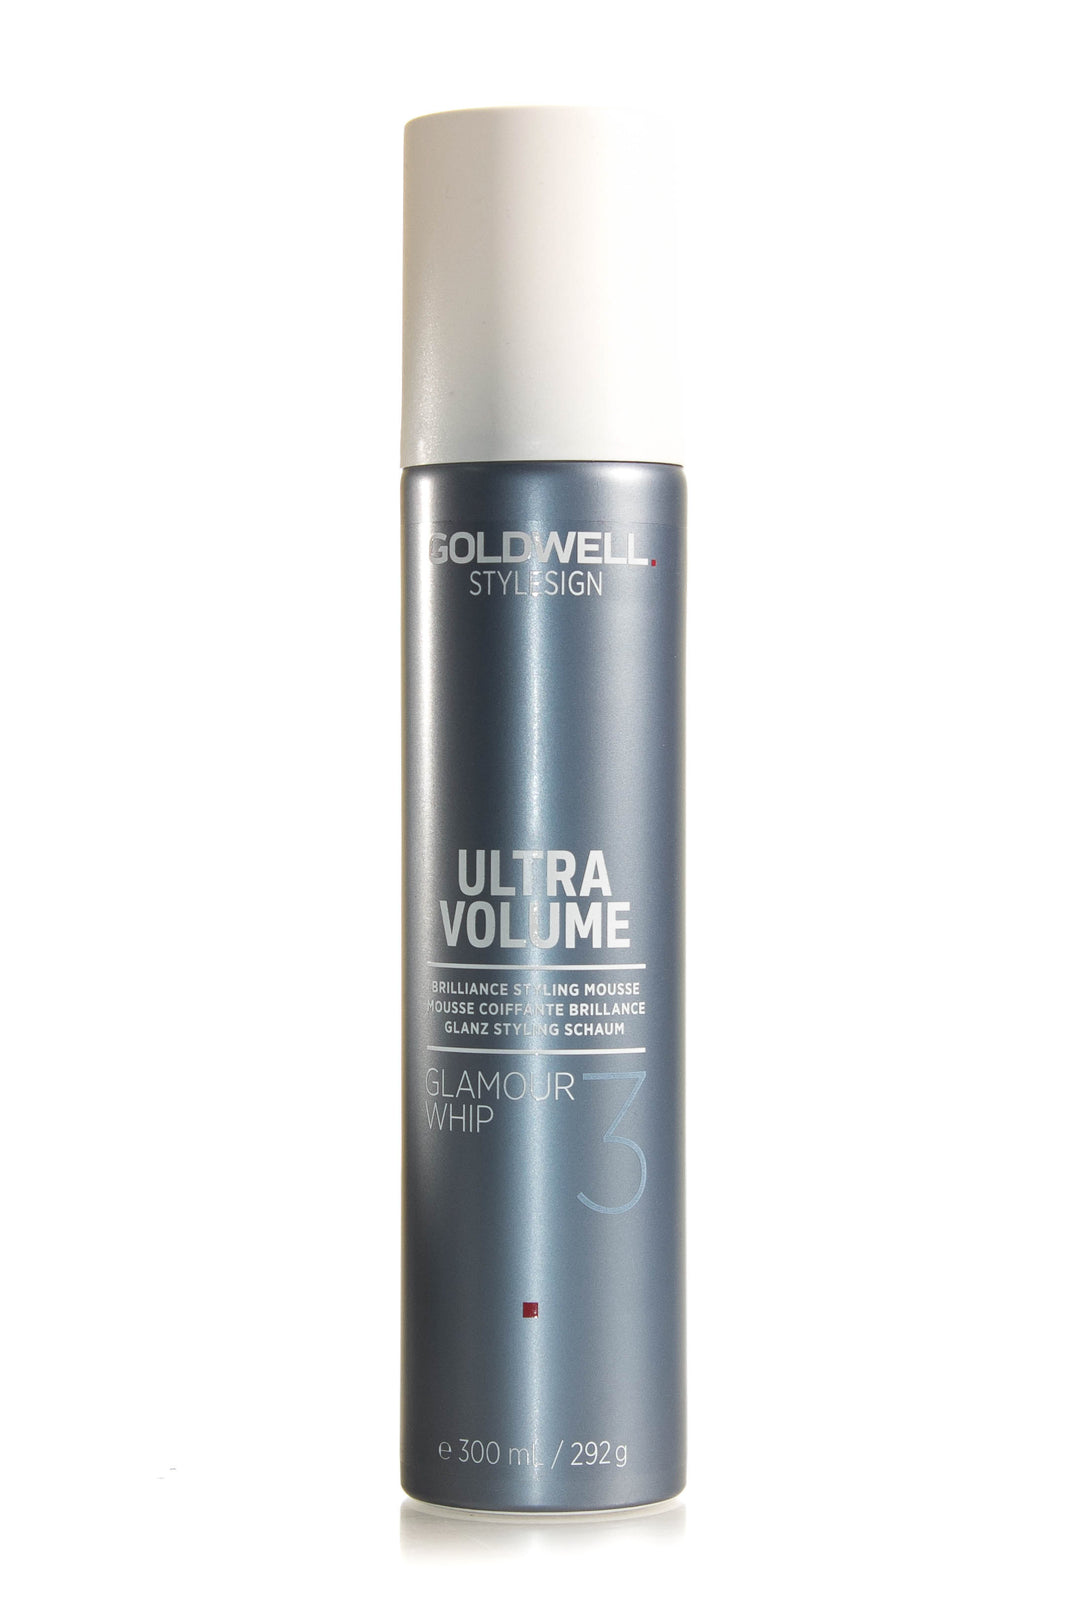 Product Image: Goldwell Ultra Volume Glamour Whip - 300ml